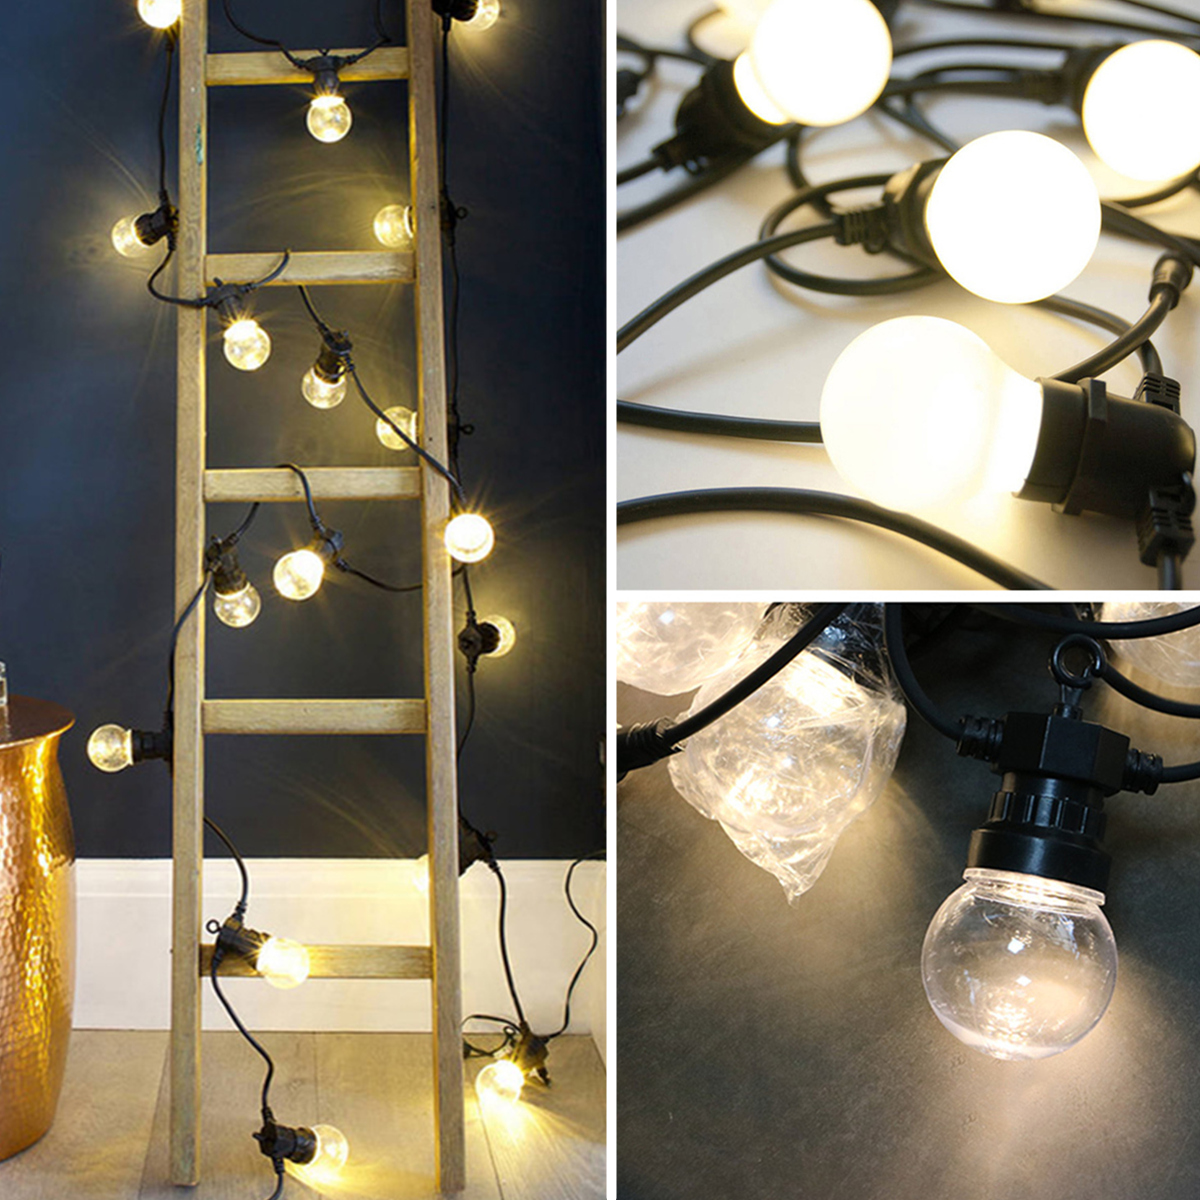 Find 5M 10M Festive Lights Indoor Outdoor Festoon Bulb LED String Party Decor Light EU Plug for Sale on Gipsybee.com with cryptocurrencies